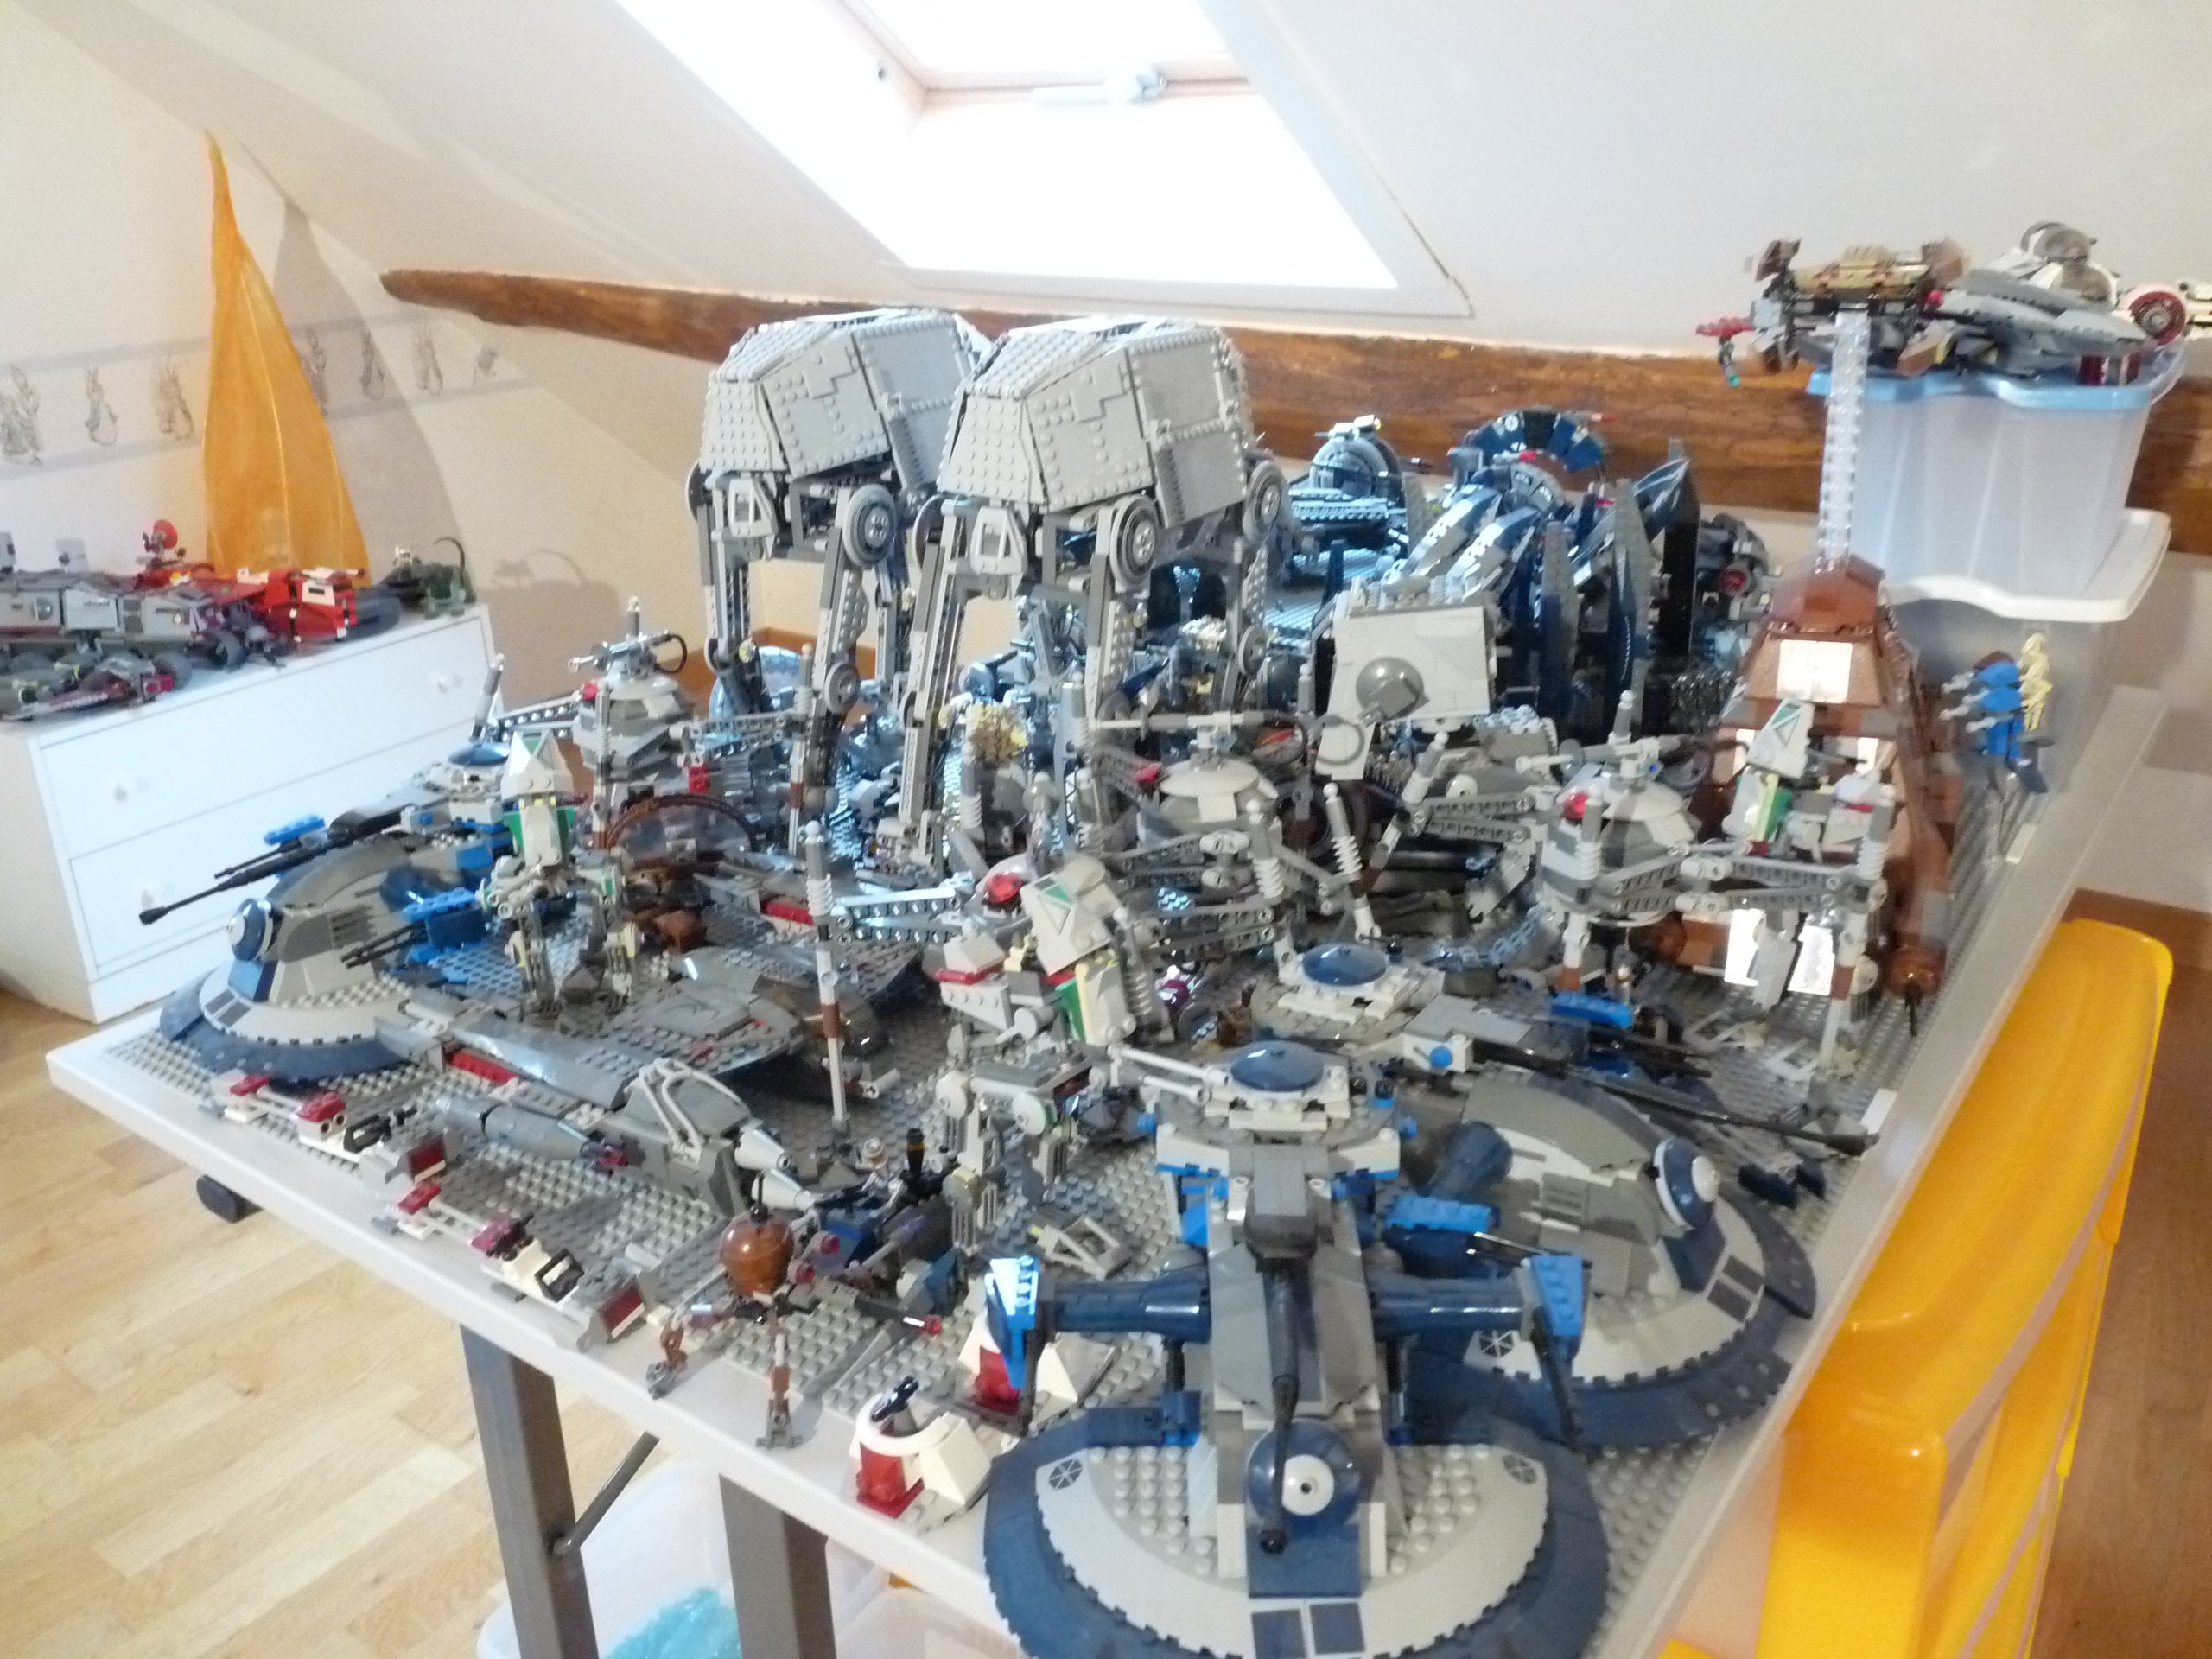 republicattak on Twitter: "Today I found those pictures my #LEGO collection back in 2011. the feelings! #LEGOStarWars #StarWars https://t.co/Qy5R98RbgN" Twitter